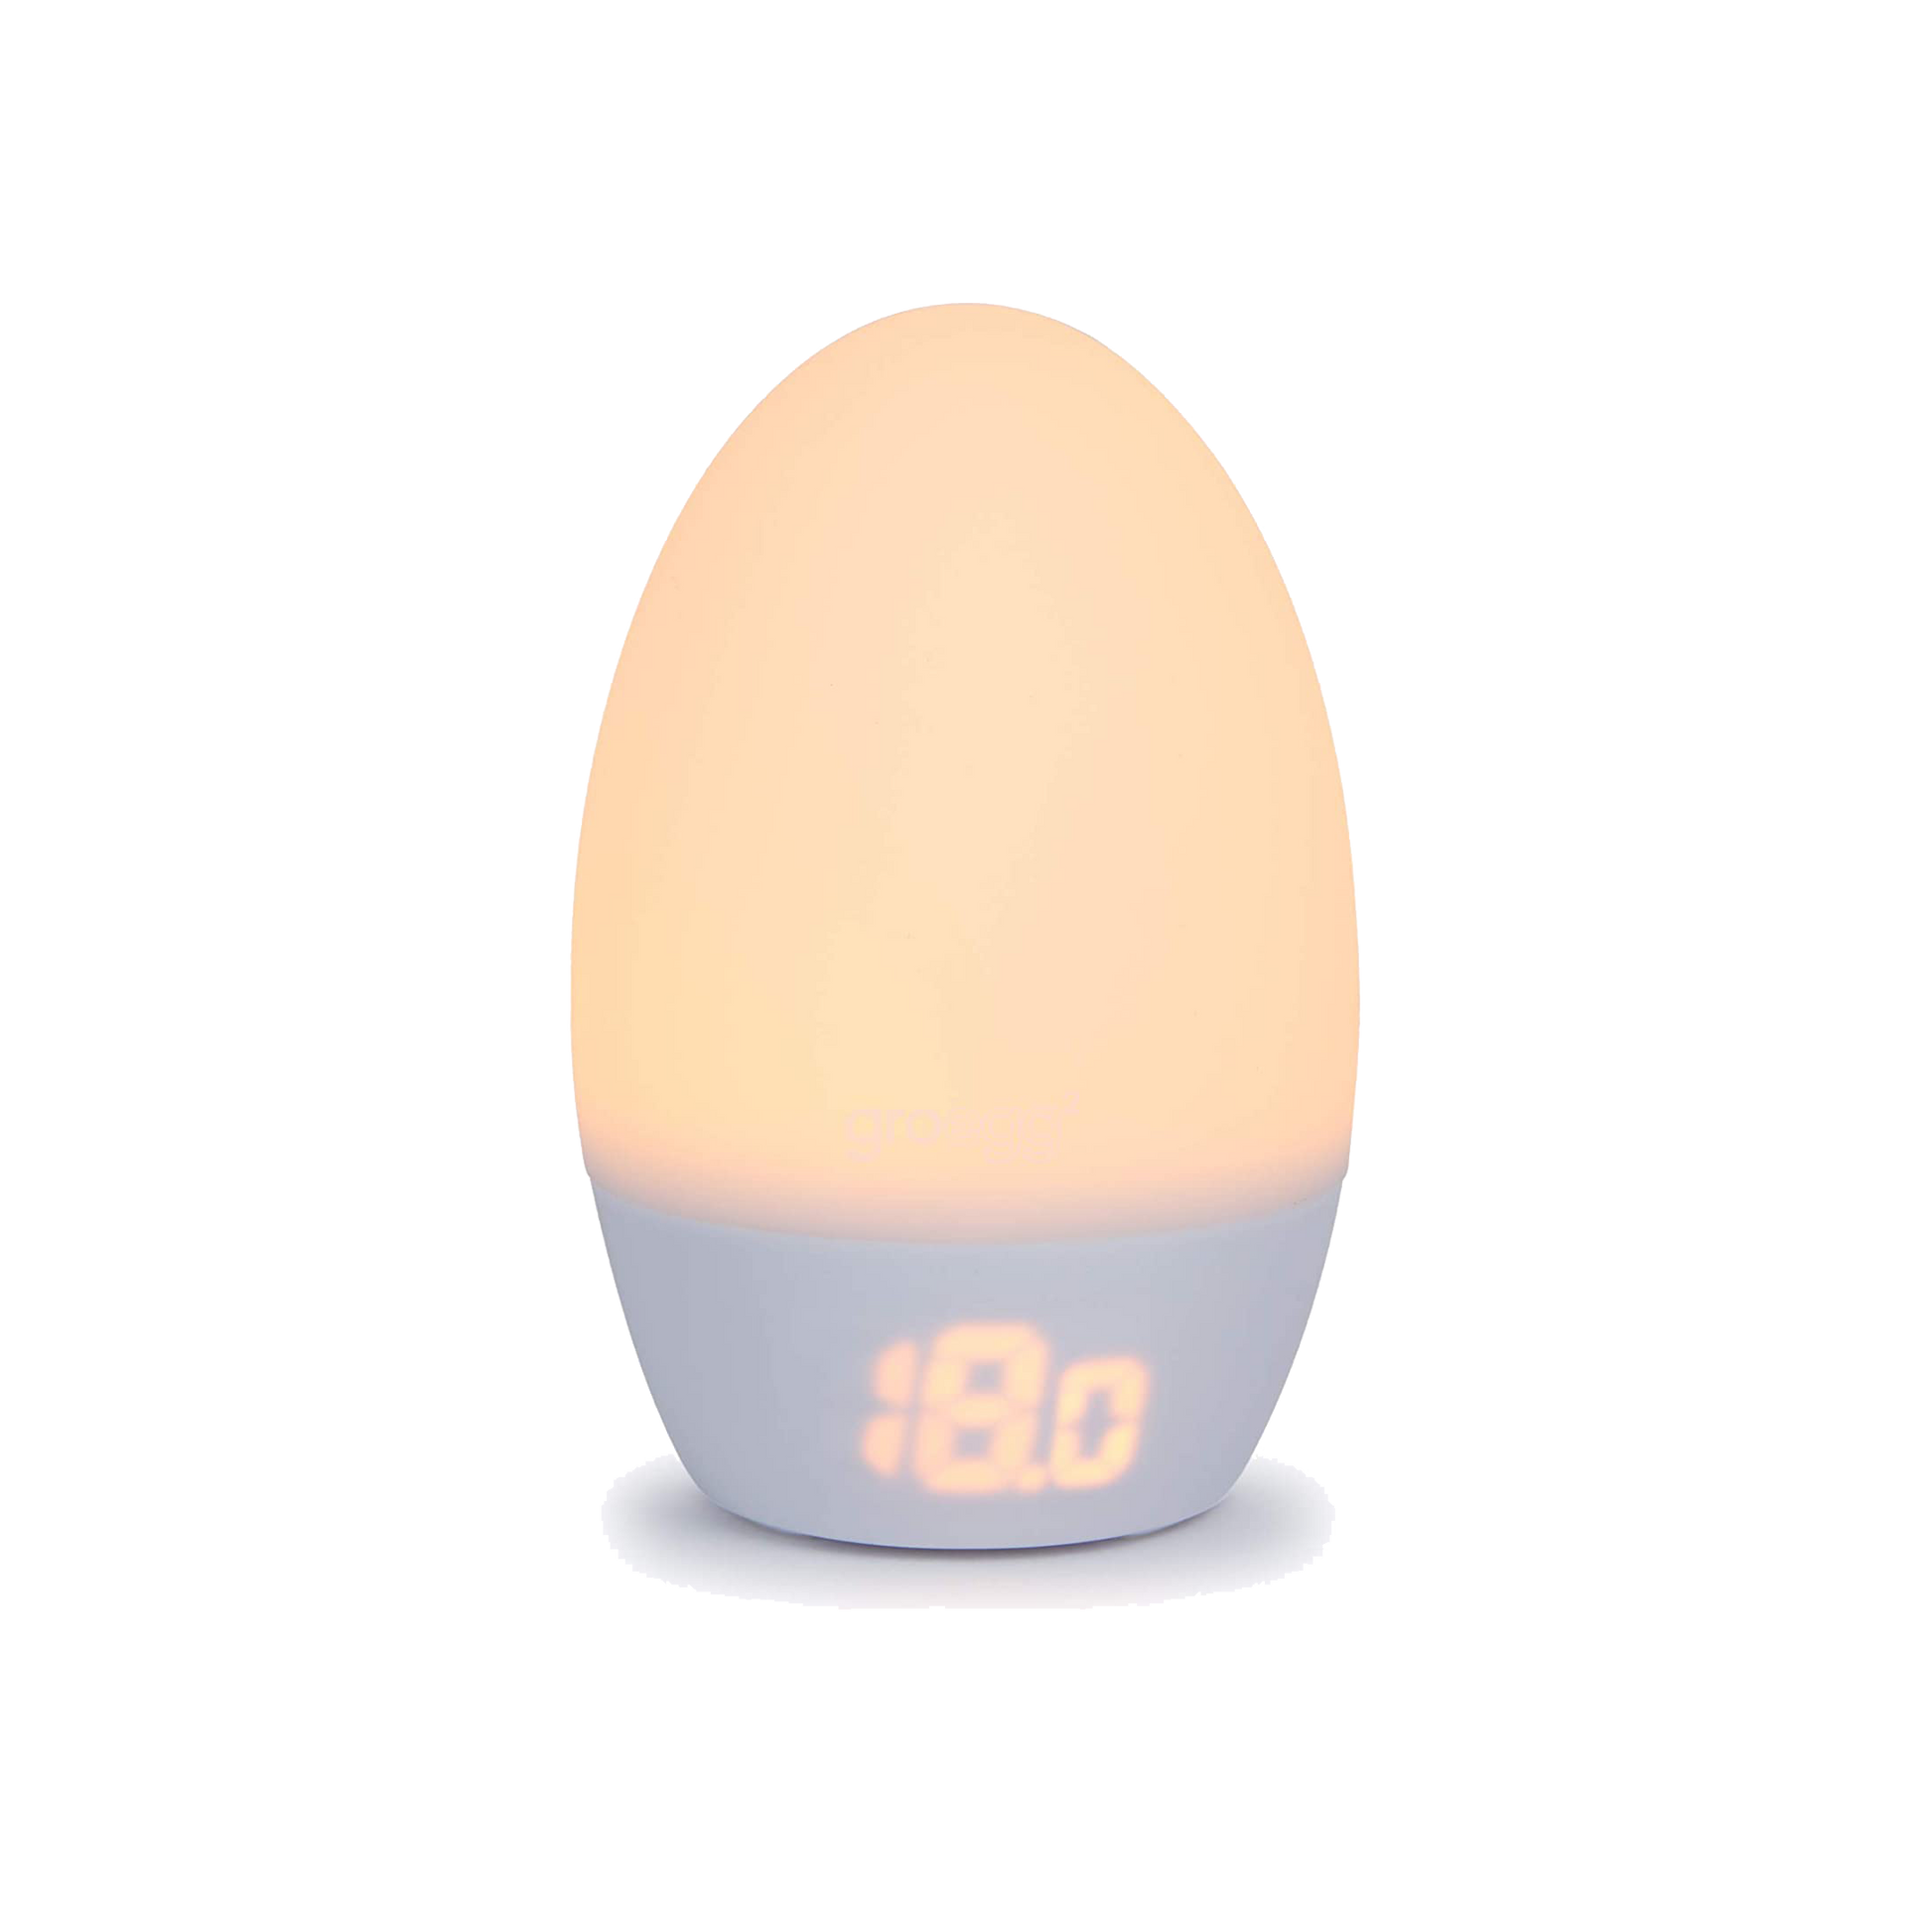 GRO EGG - Colour changing digital room thermometer,The color